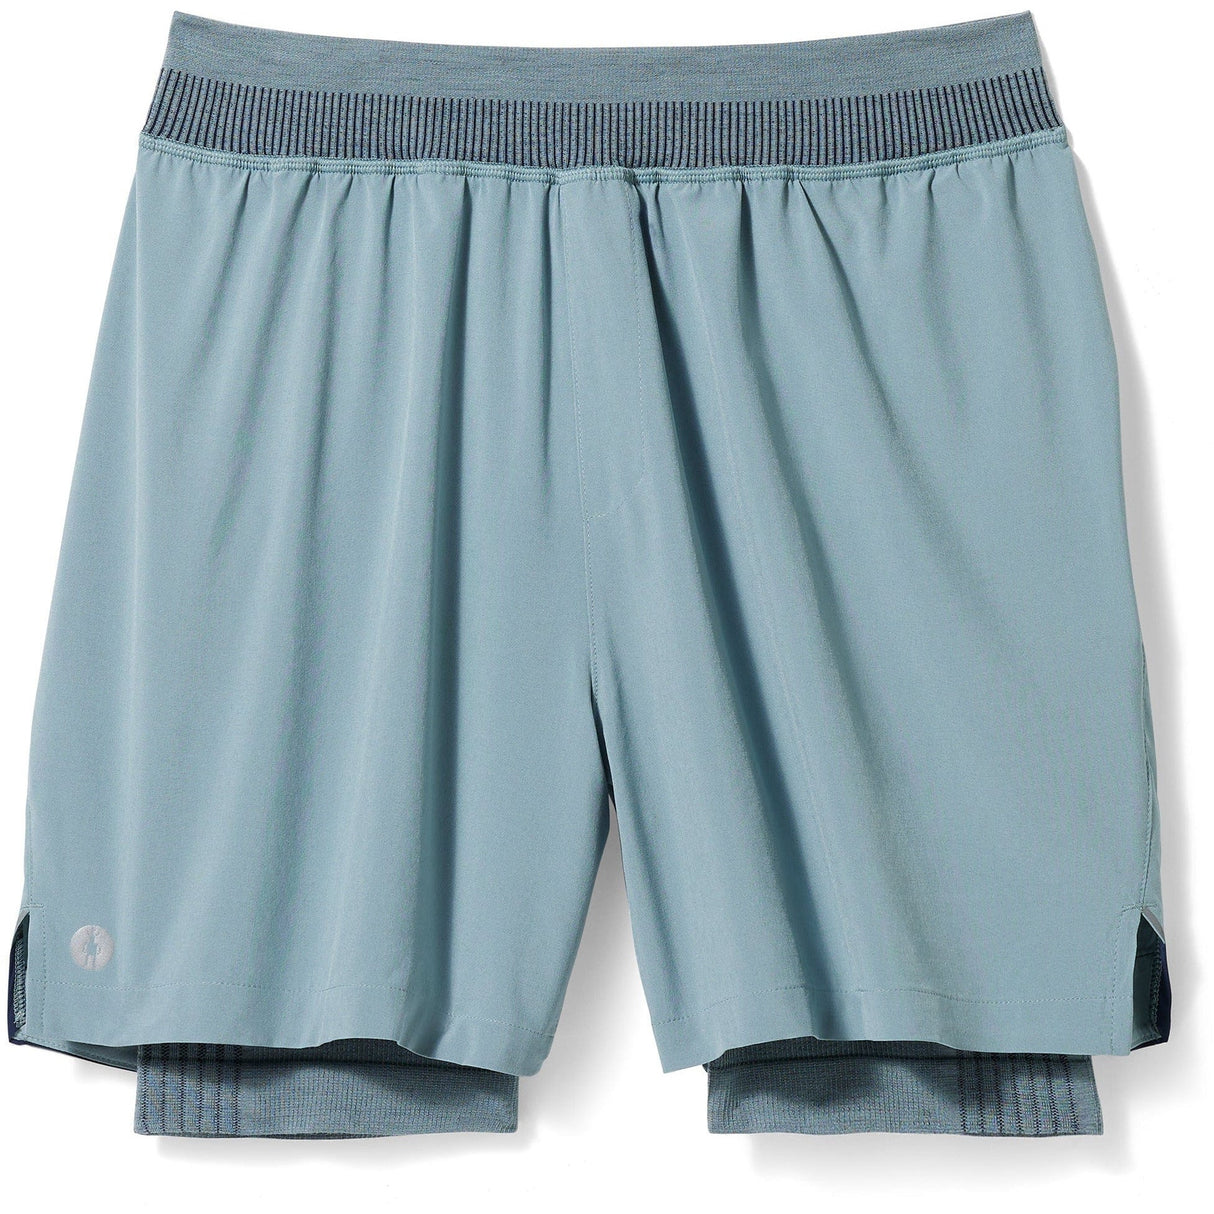 Smartwool Mens Intraknit Active Lined Shorts  -  Small / Lead